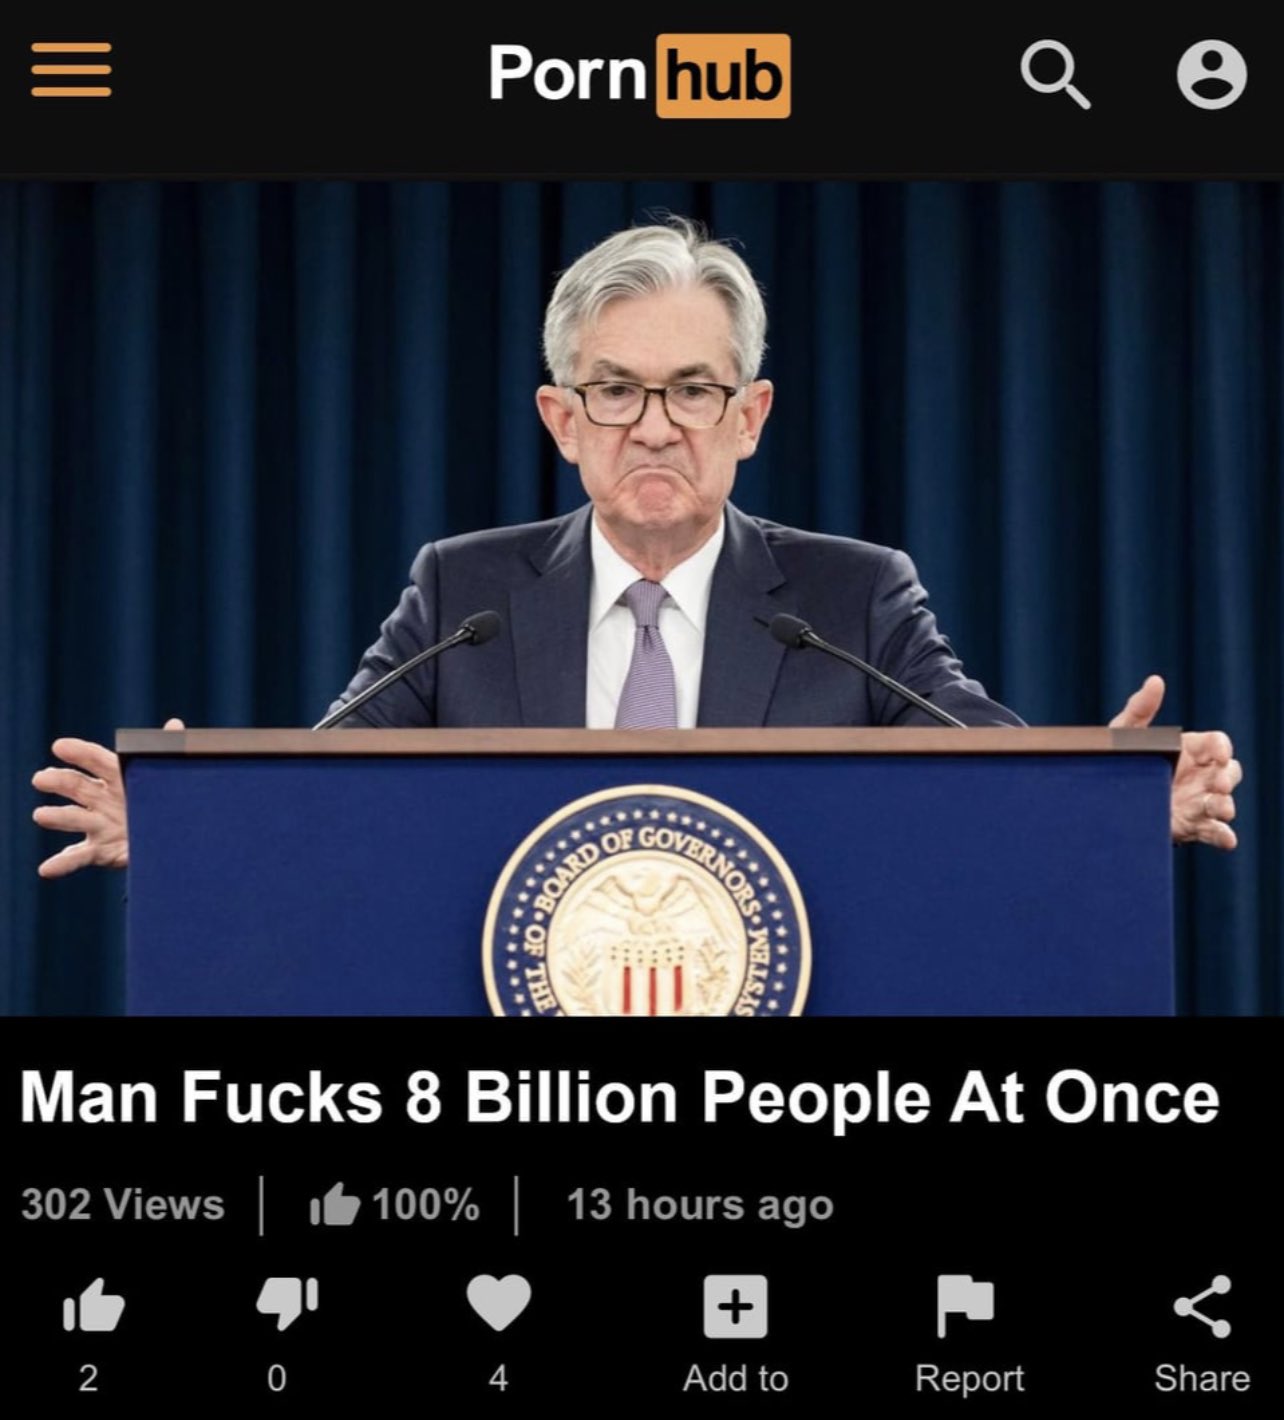 = Por Q 6
Man Fucks 8 Billion People At Once
302 Views 100% 13 hours ago
2 0 4 Add to Report Shar